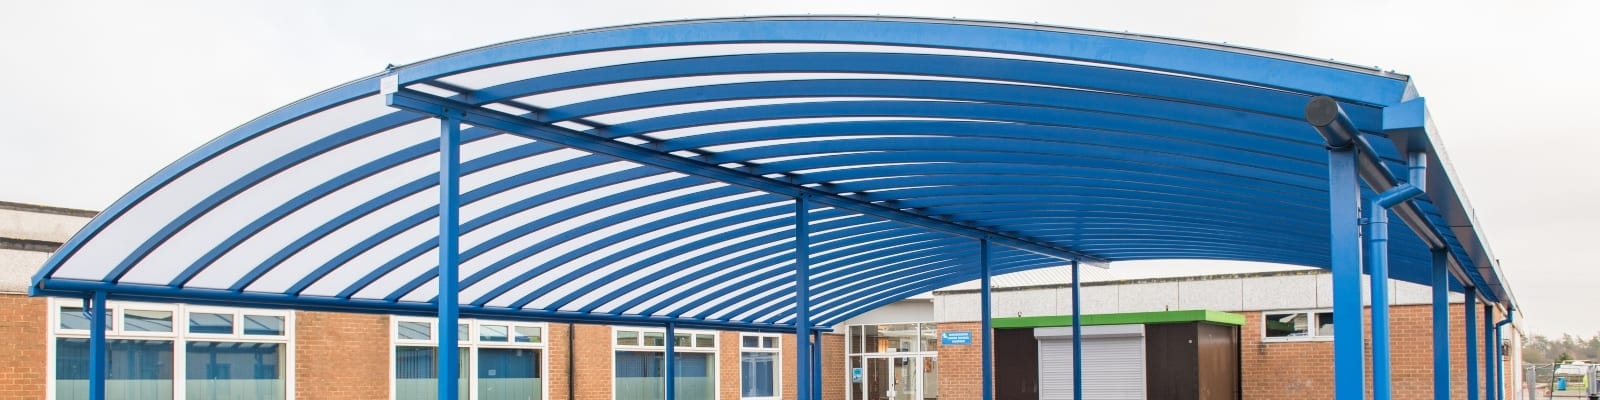 Tewkesbury School Builds Dining Canopy for Pupils A S Landscape